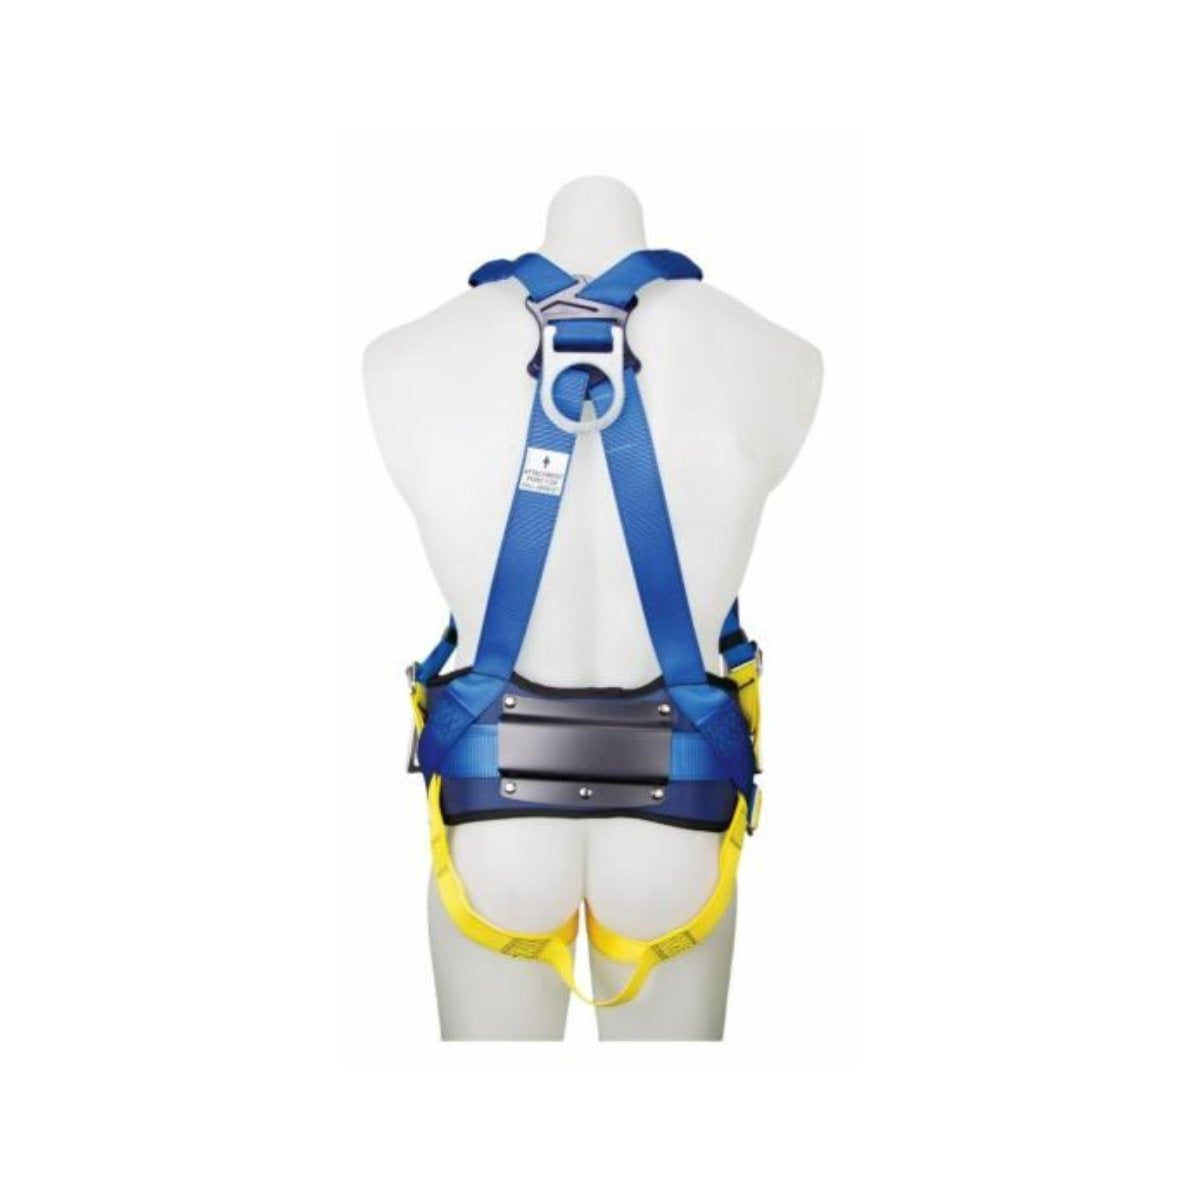 3M™ Protecta® P50 Blue and Yellow Construction Harness 1390062A (Each)